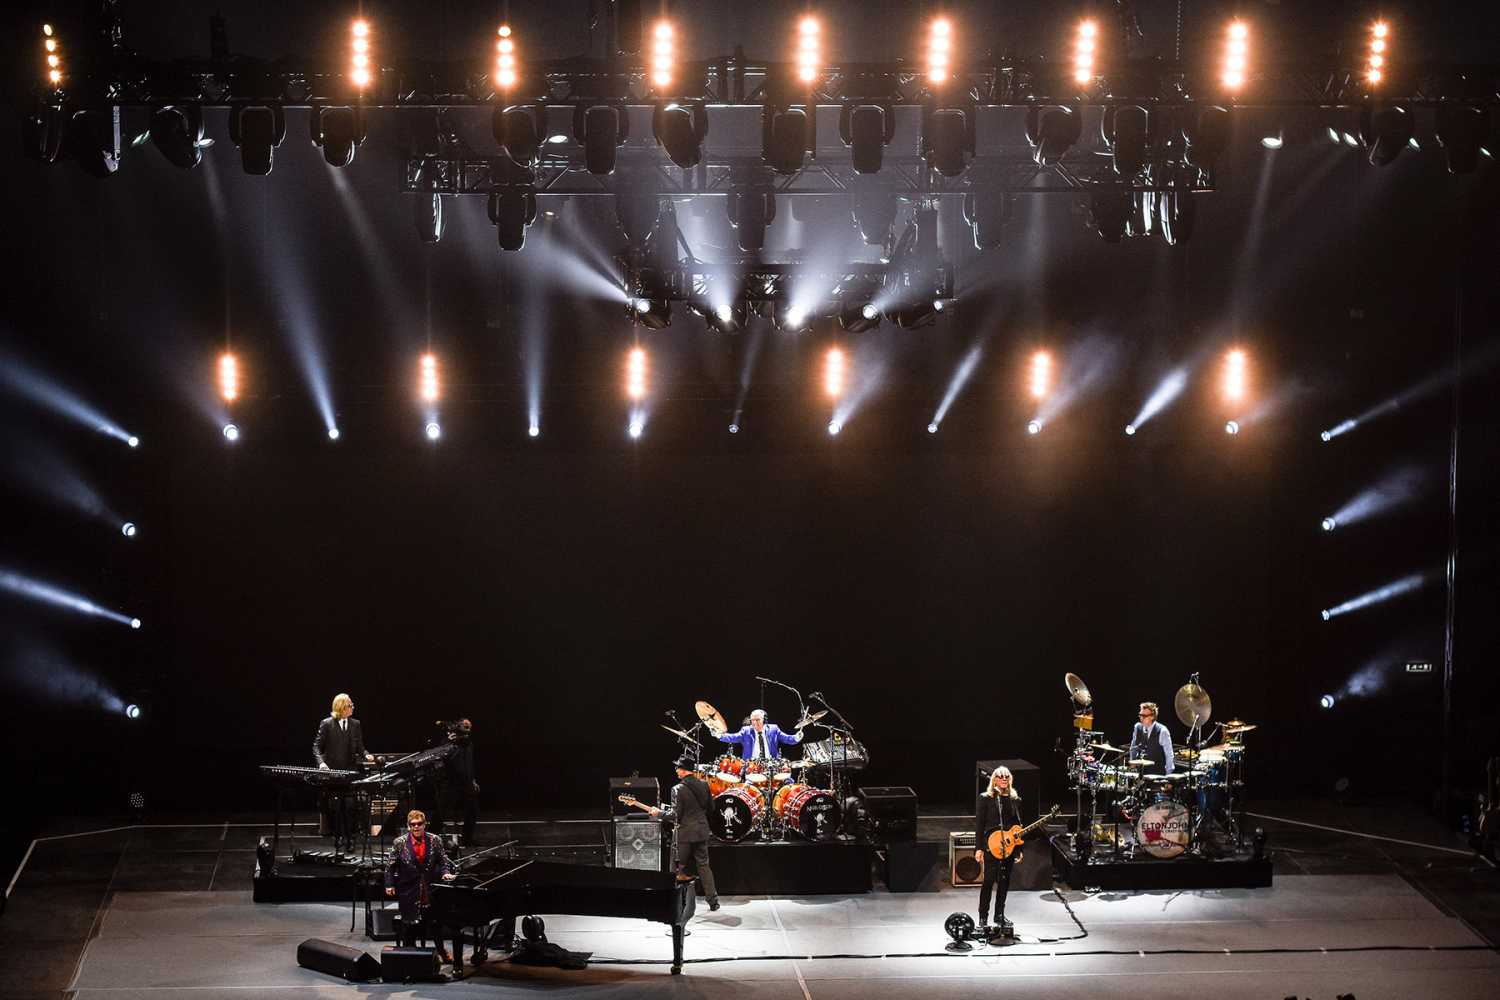 Elton played a number of UK dates this summer, including the First Direct Arena in Leeds